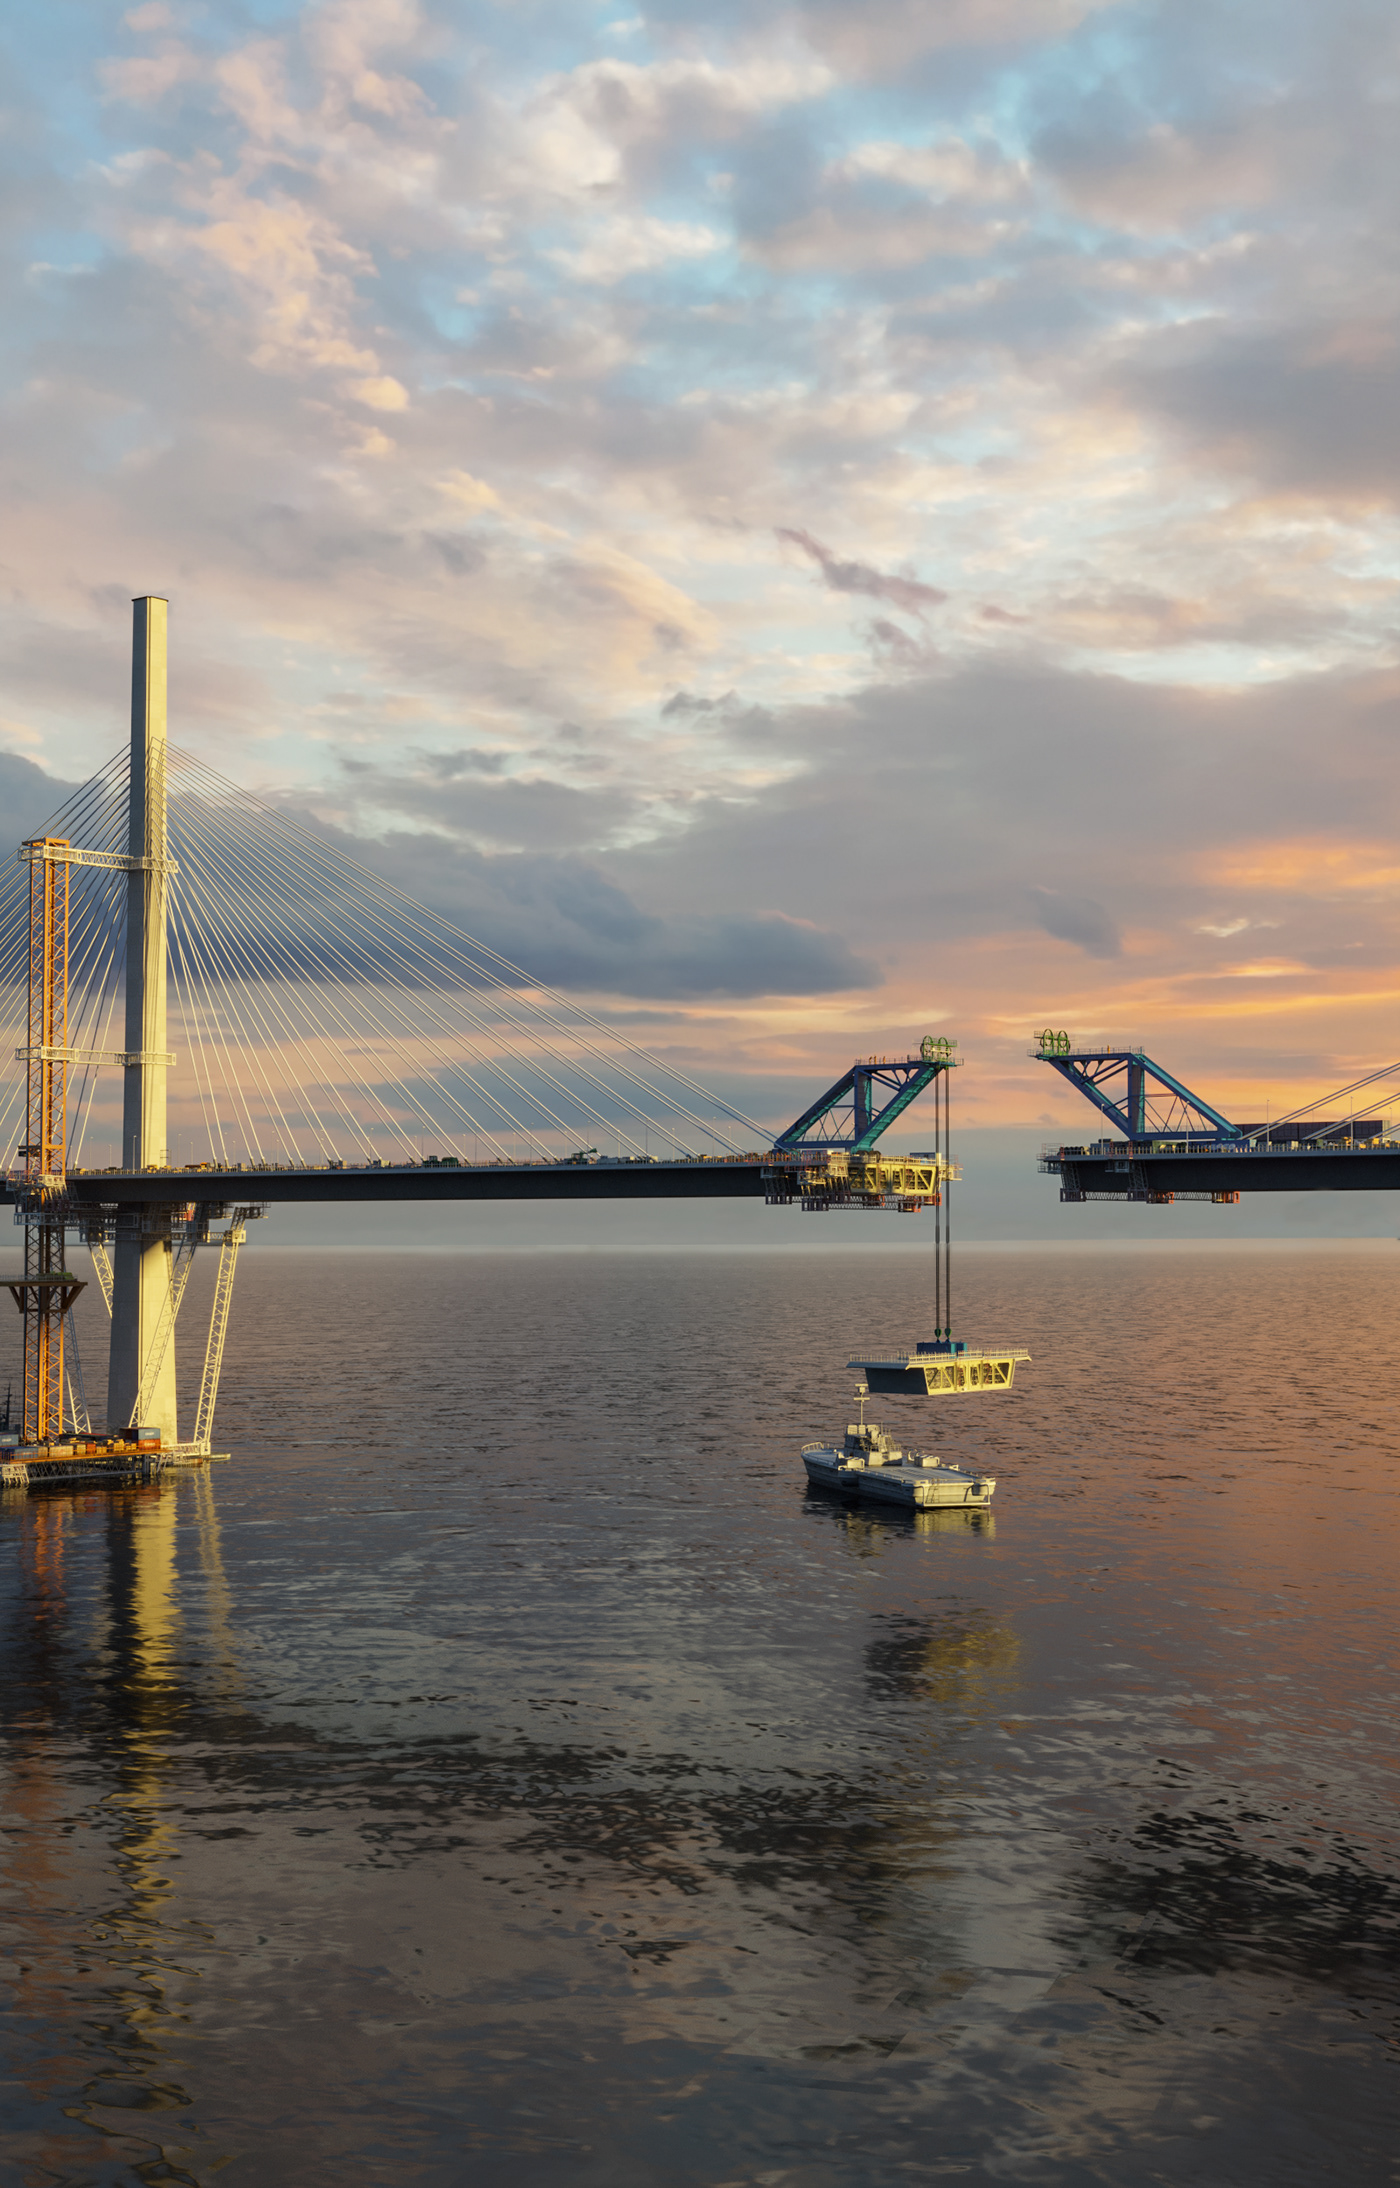 animation  rendering visualisation 3d mopdelling bridge Aerial Queensferry Crossing arhi architecture